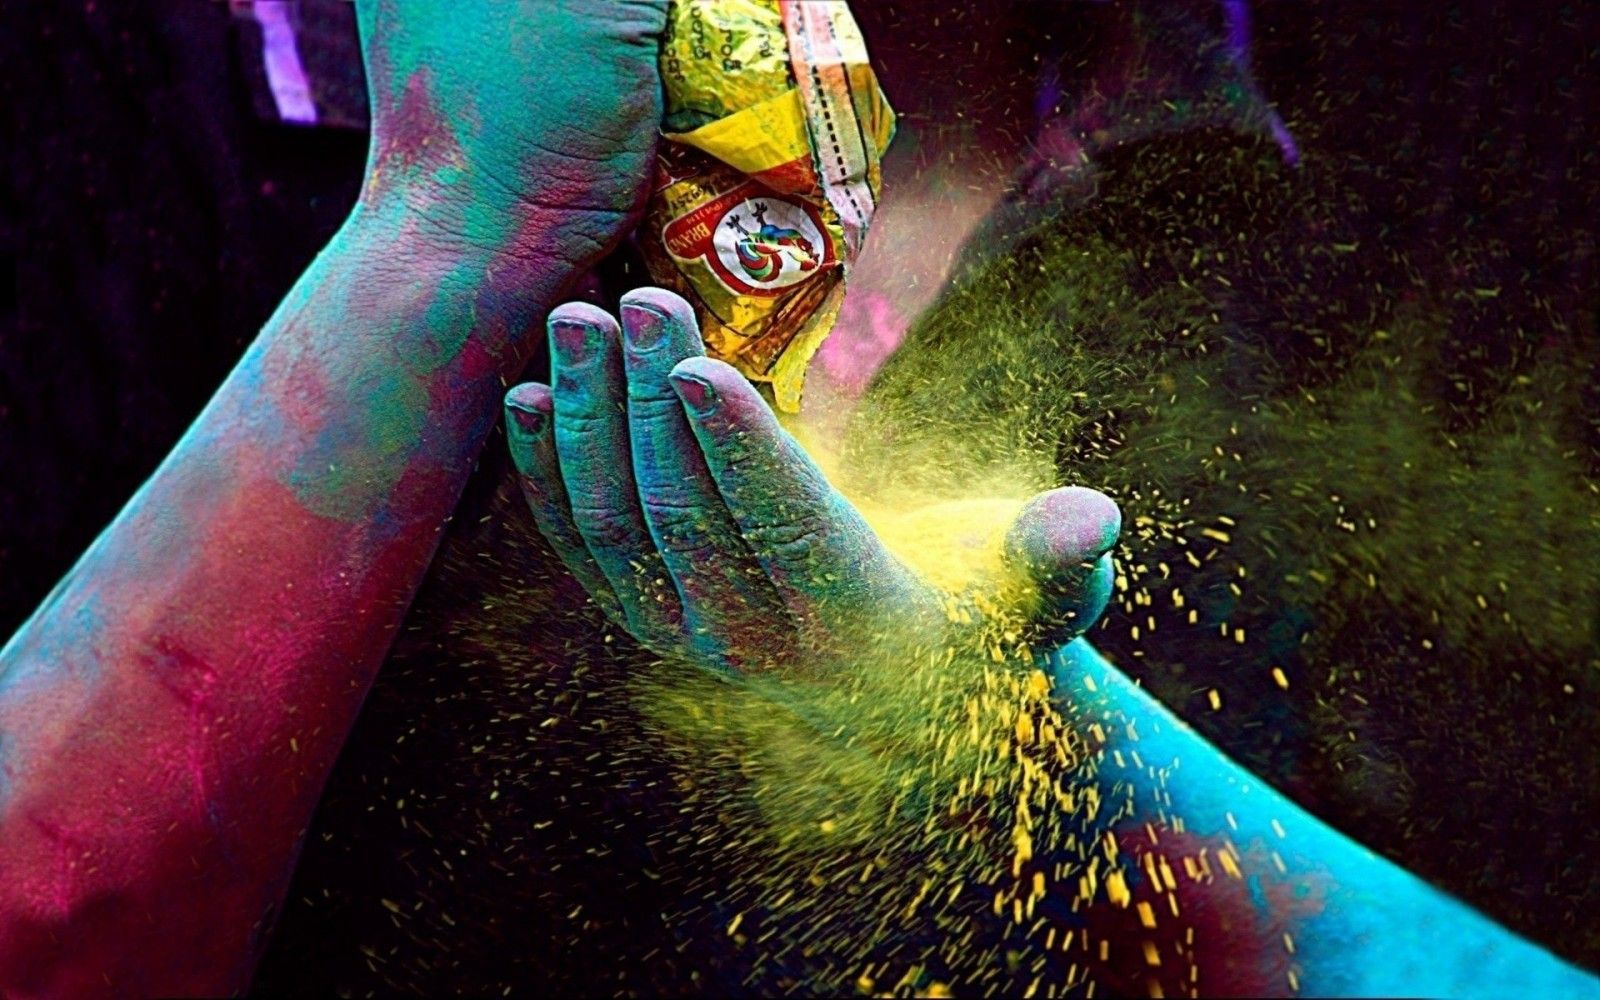 Wallpaper, colorful, people, hands, night, India, blue, underwater, holi festival, powder, dust, light, color, darkness, screenshot, computer wallpaper, special effects, macro photography 1920x1200